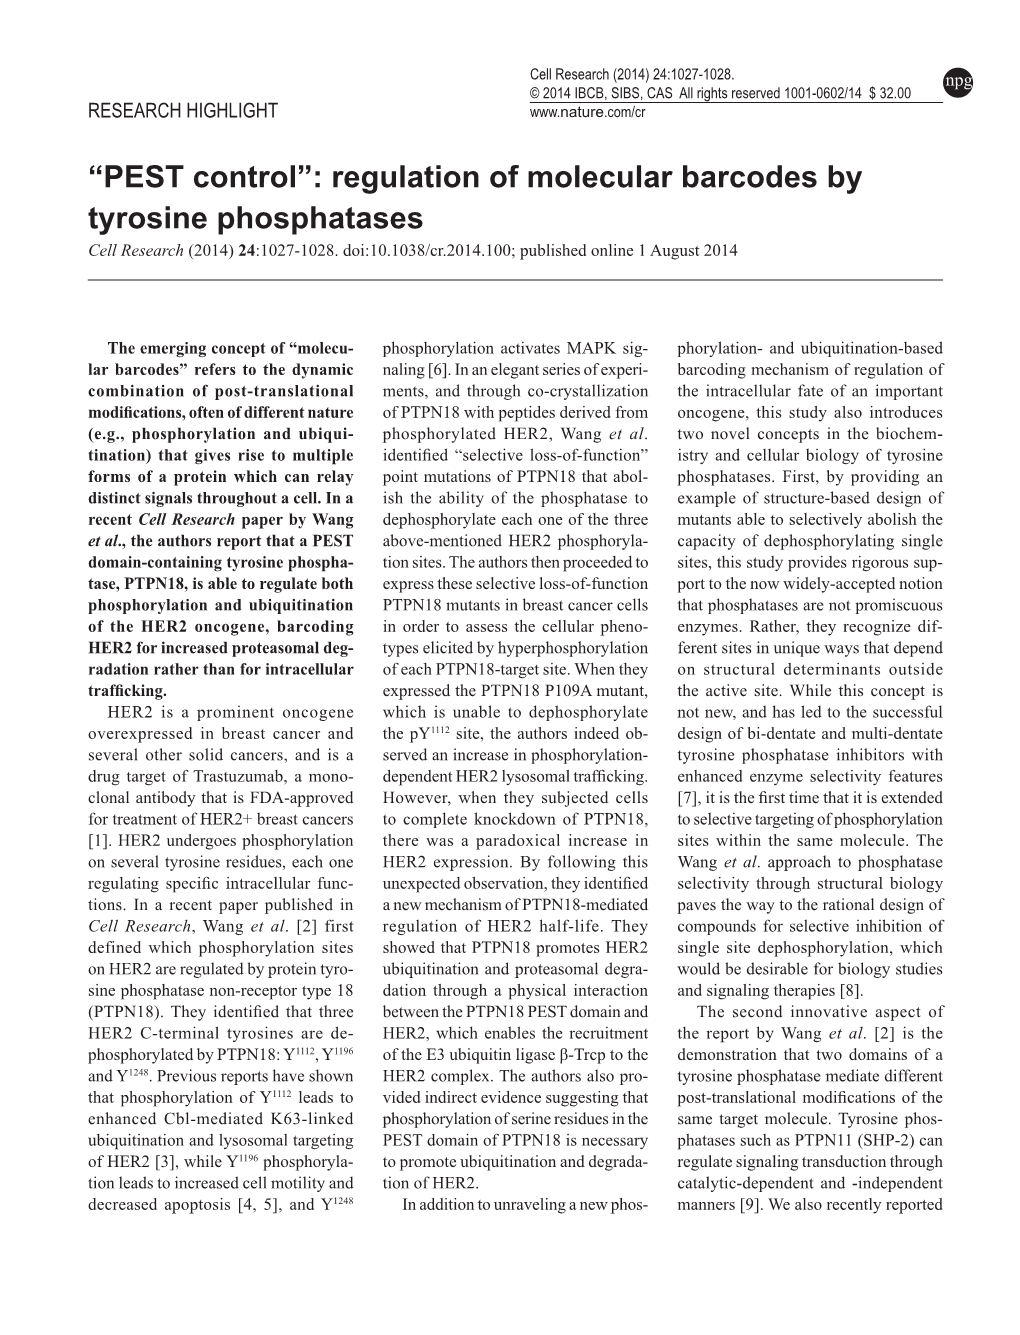 PEST Control”: Regulation of Molecular Barcodes by Tyrosine Phosphatases Cell Research (2014) 24:1027-1028